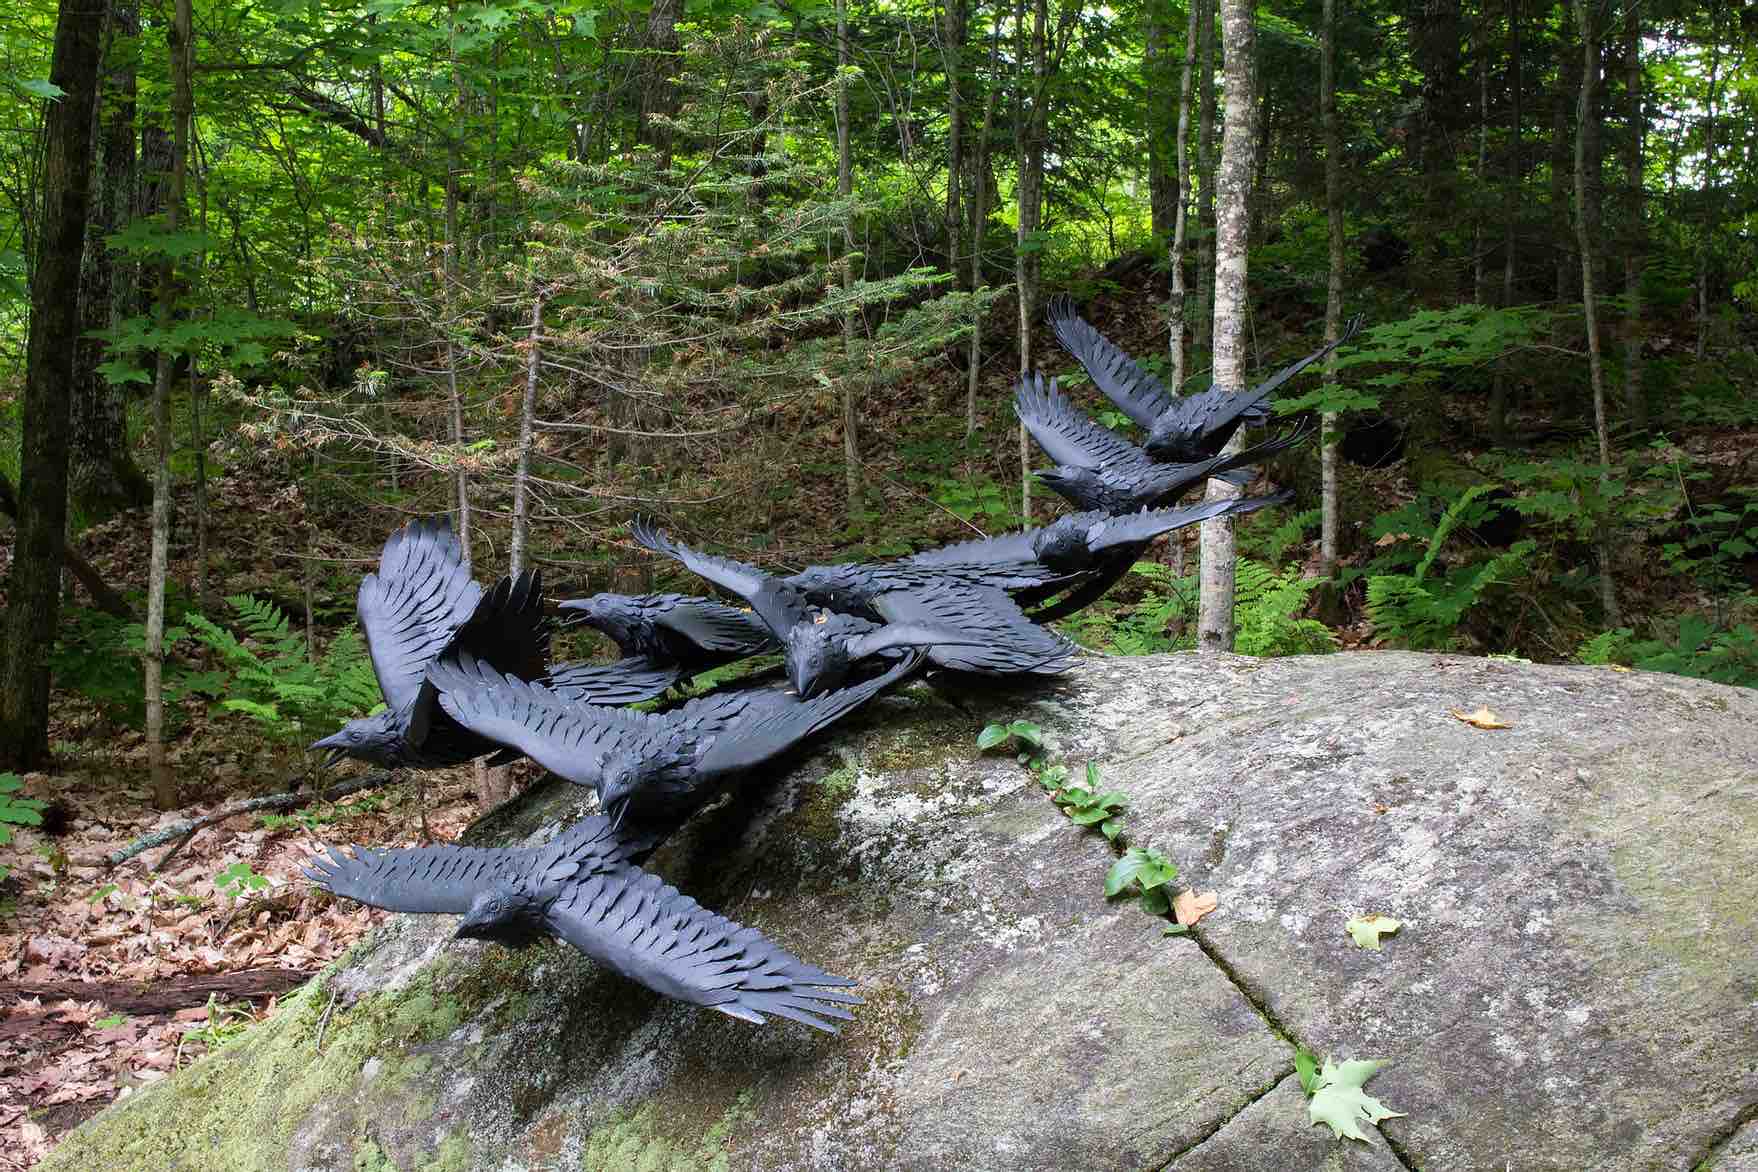 Top things to do in Haliburton Sculpture Forest includes trails and bird sculptures like these